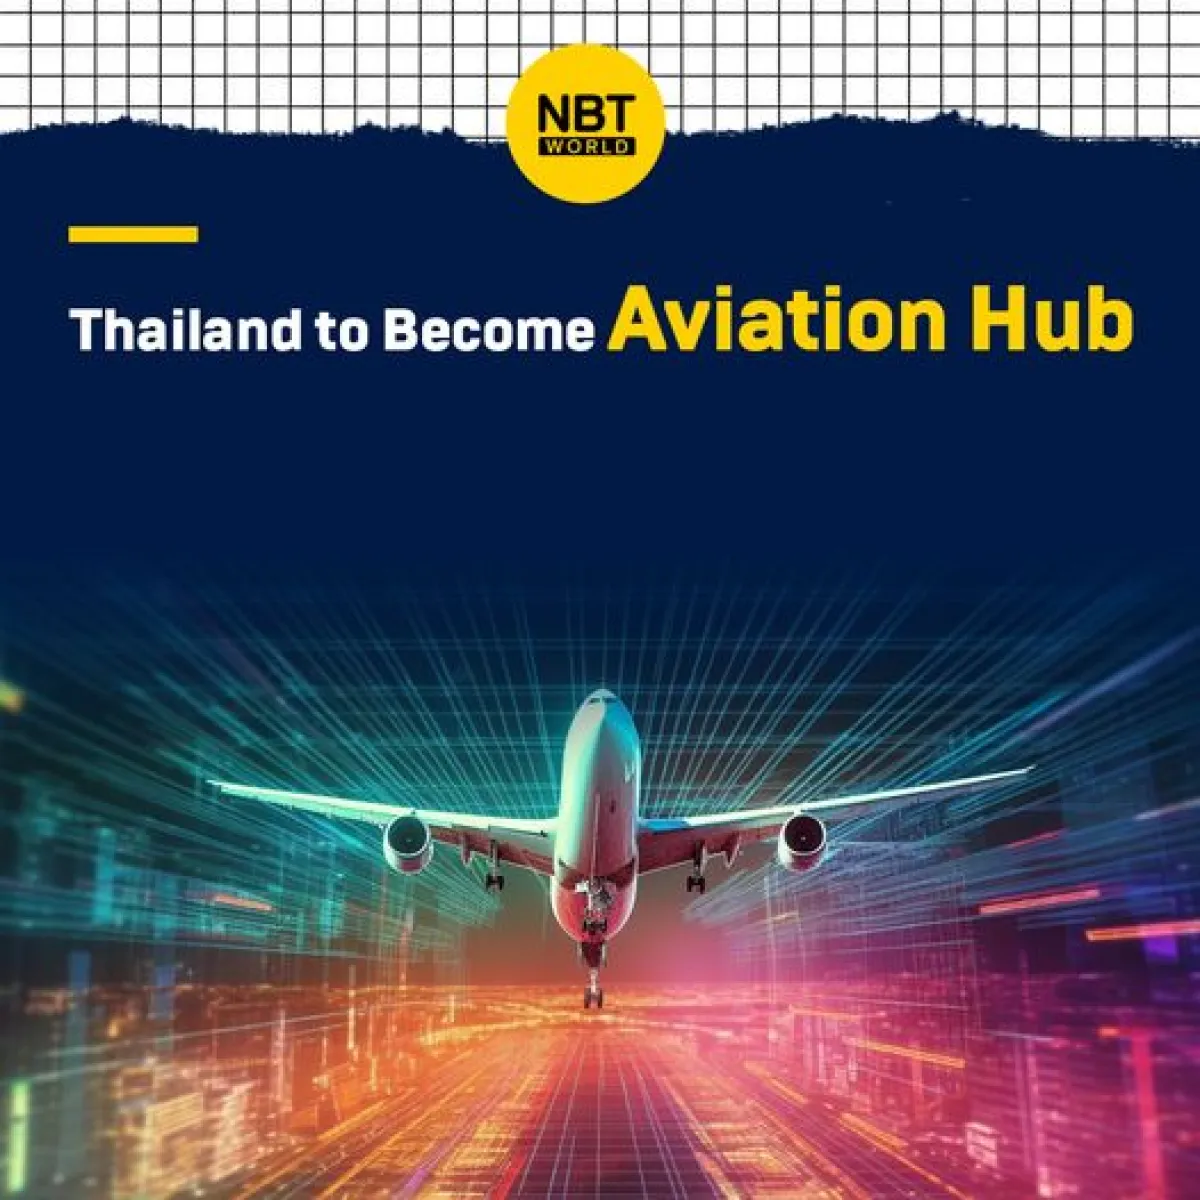 Prime Minister Srettha Thavisin has introduced Thailand Vision, pledging to elevate Thailand as a key aviation hub in the Asia-Pacific region.